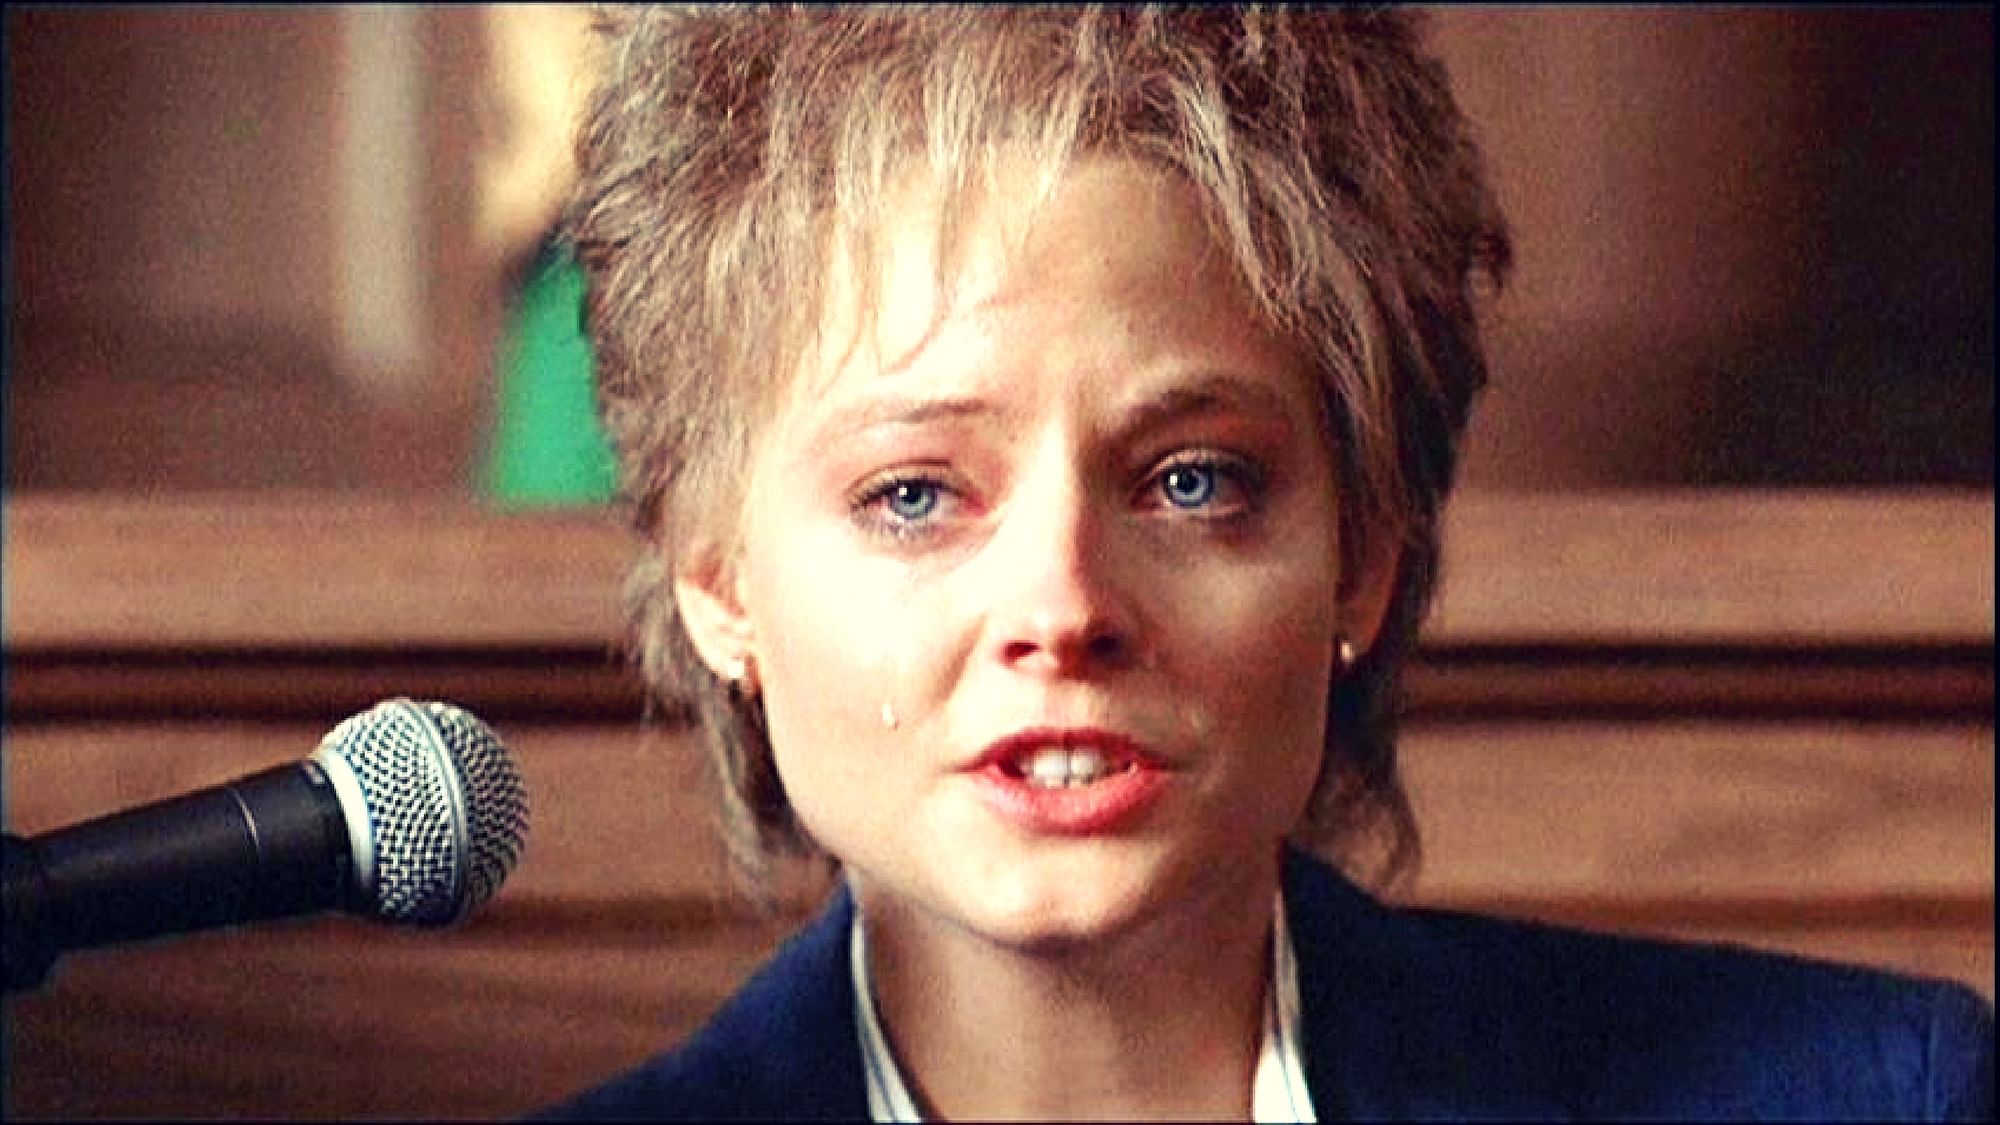 Jodie Foster’s <i>The Accused</i> is shockingly relevant even 30 years later.